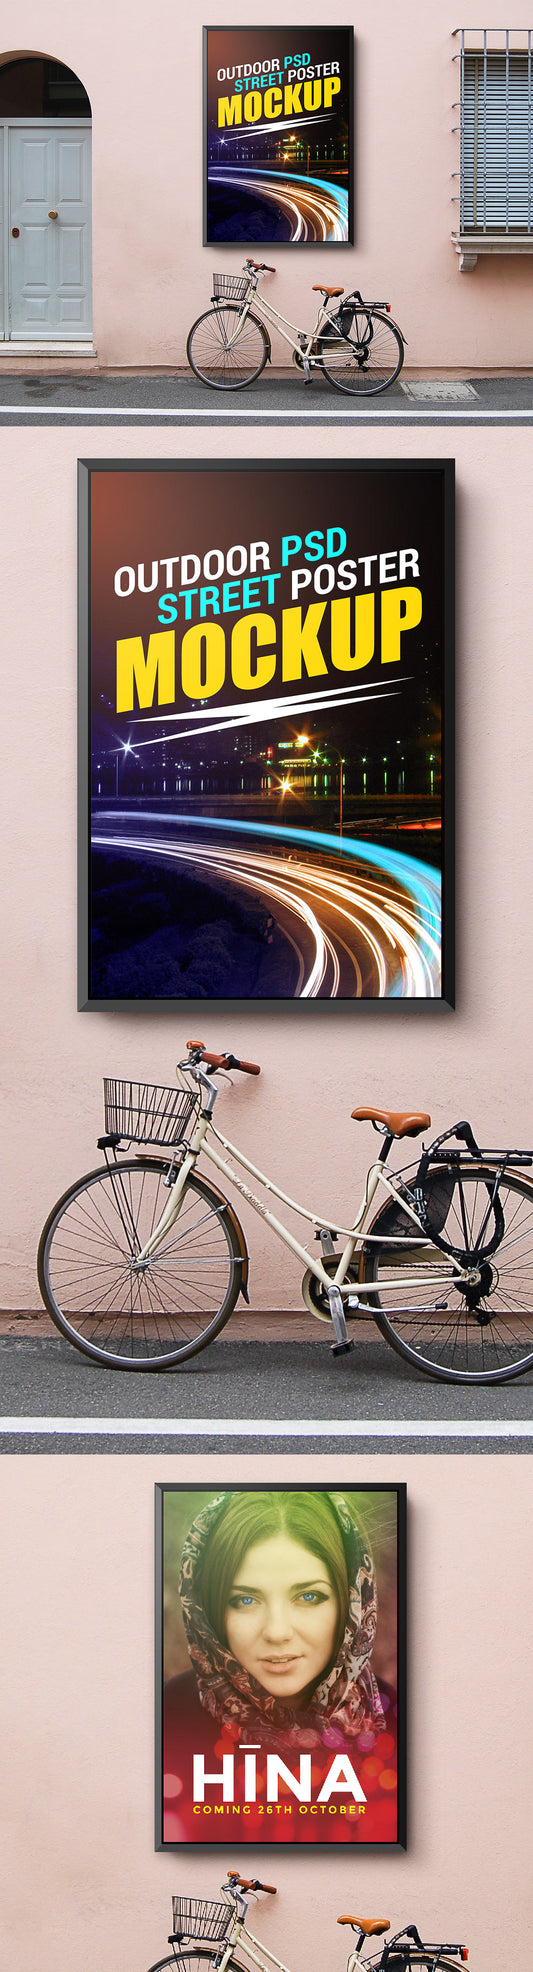 Free Outdoor Street Poster Frame Mockup with Bicycle, Door and Window